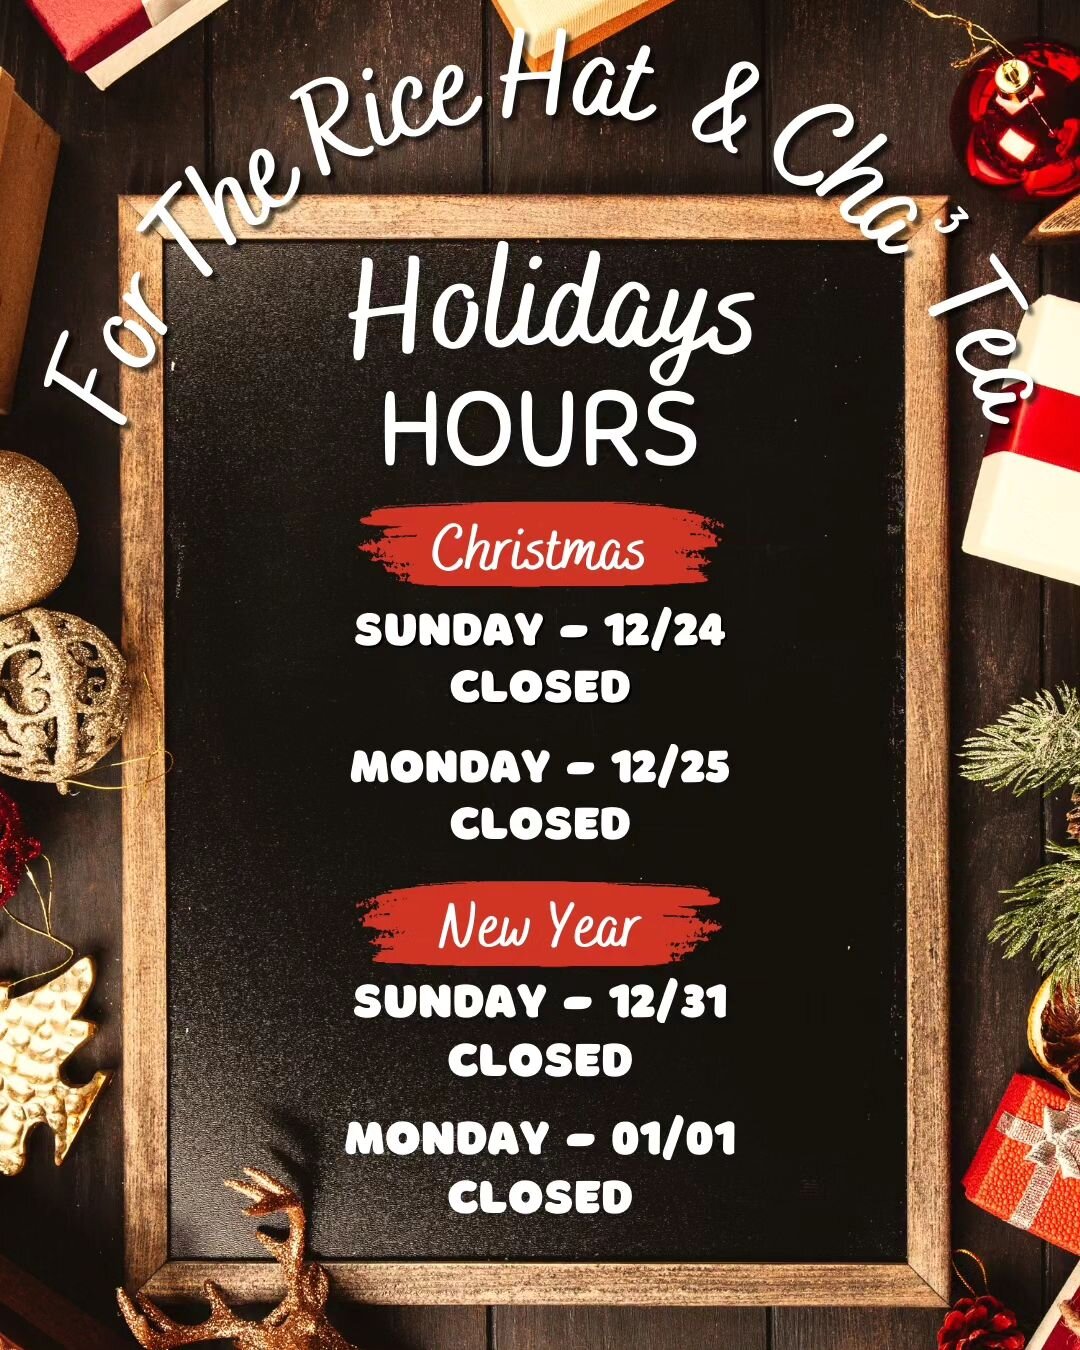 Happy Holidays Everyone! 
These will be our hours for the upcoming holidays weekends. All other days in between will be normal hours.